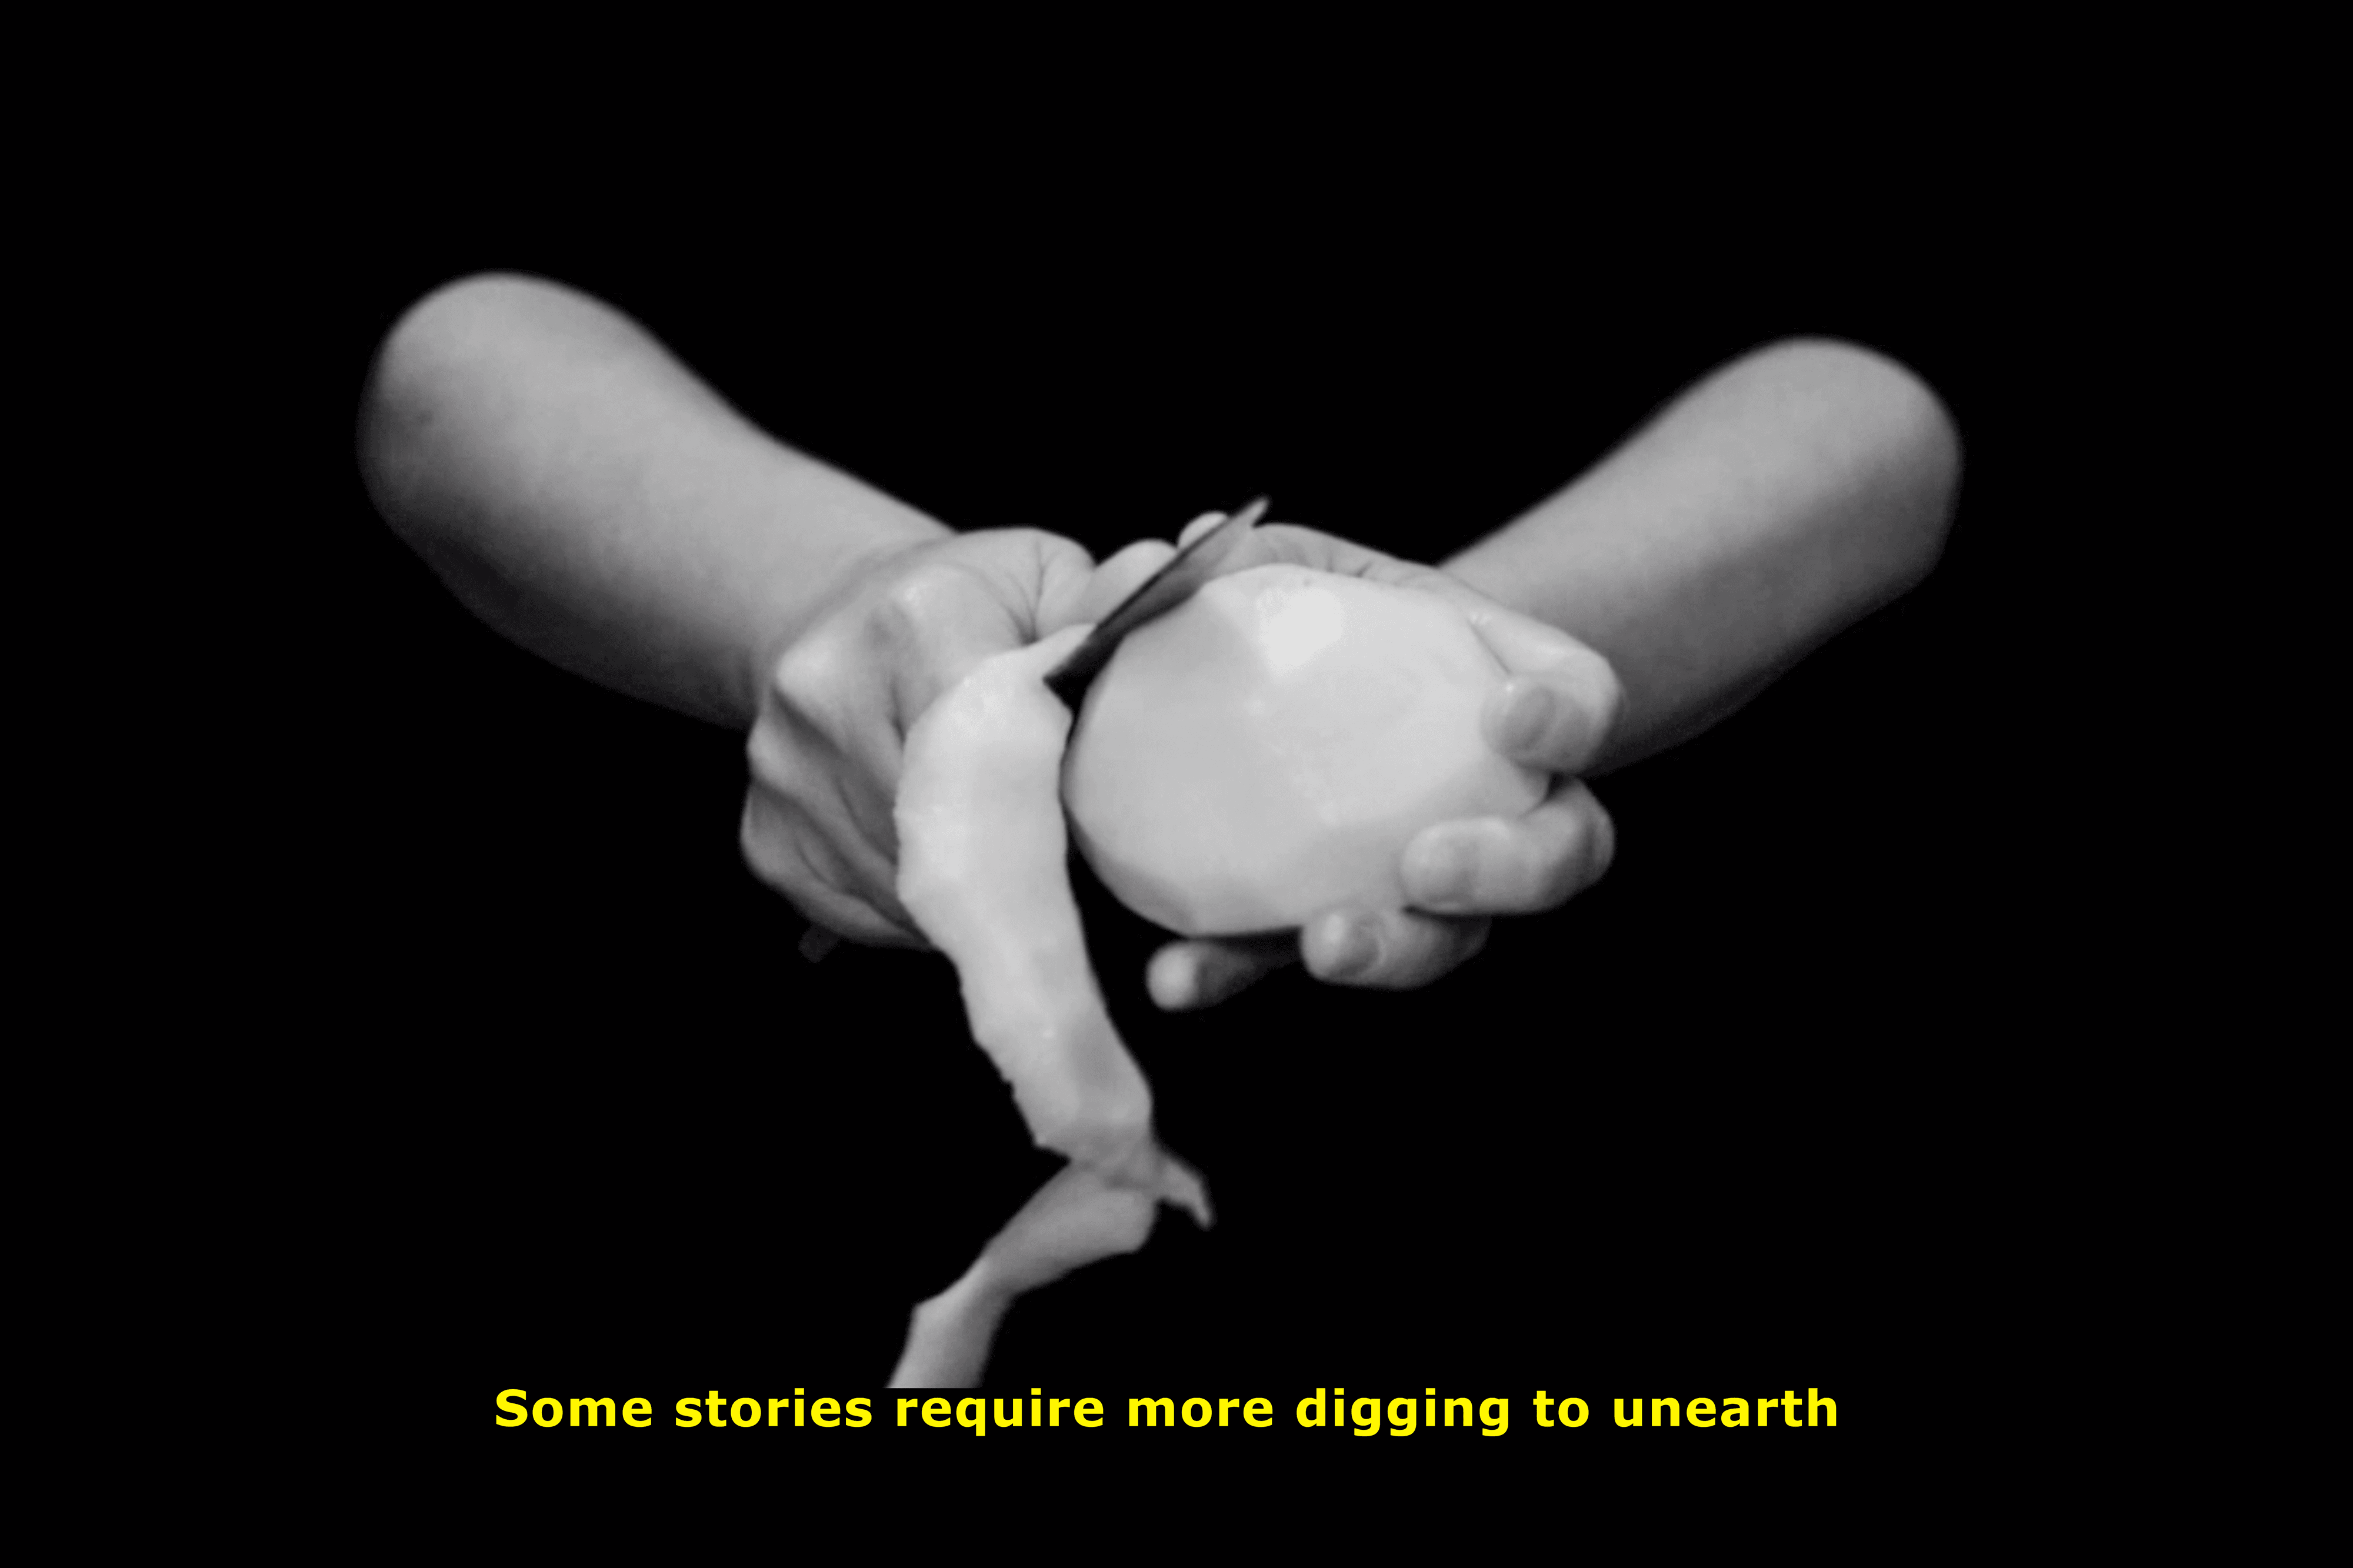 Some stories require more digging to unearth